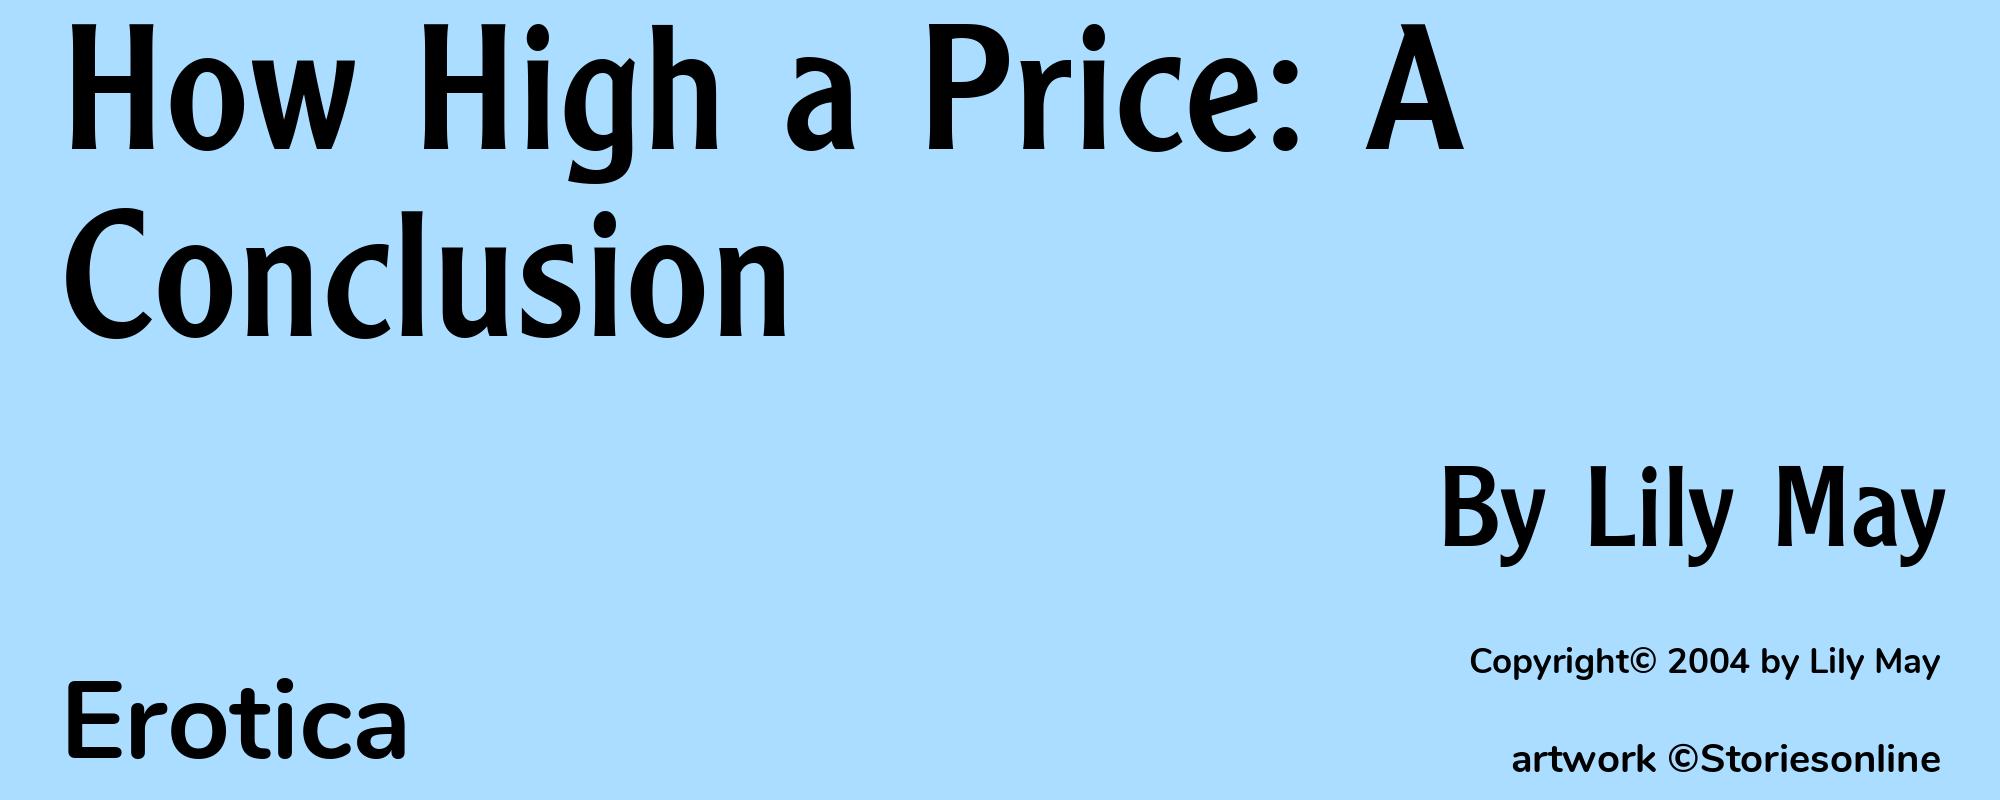 How High a Price: A Conclusion - Cover